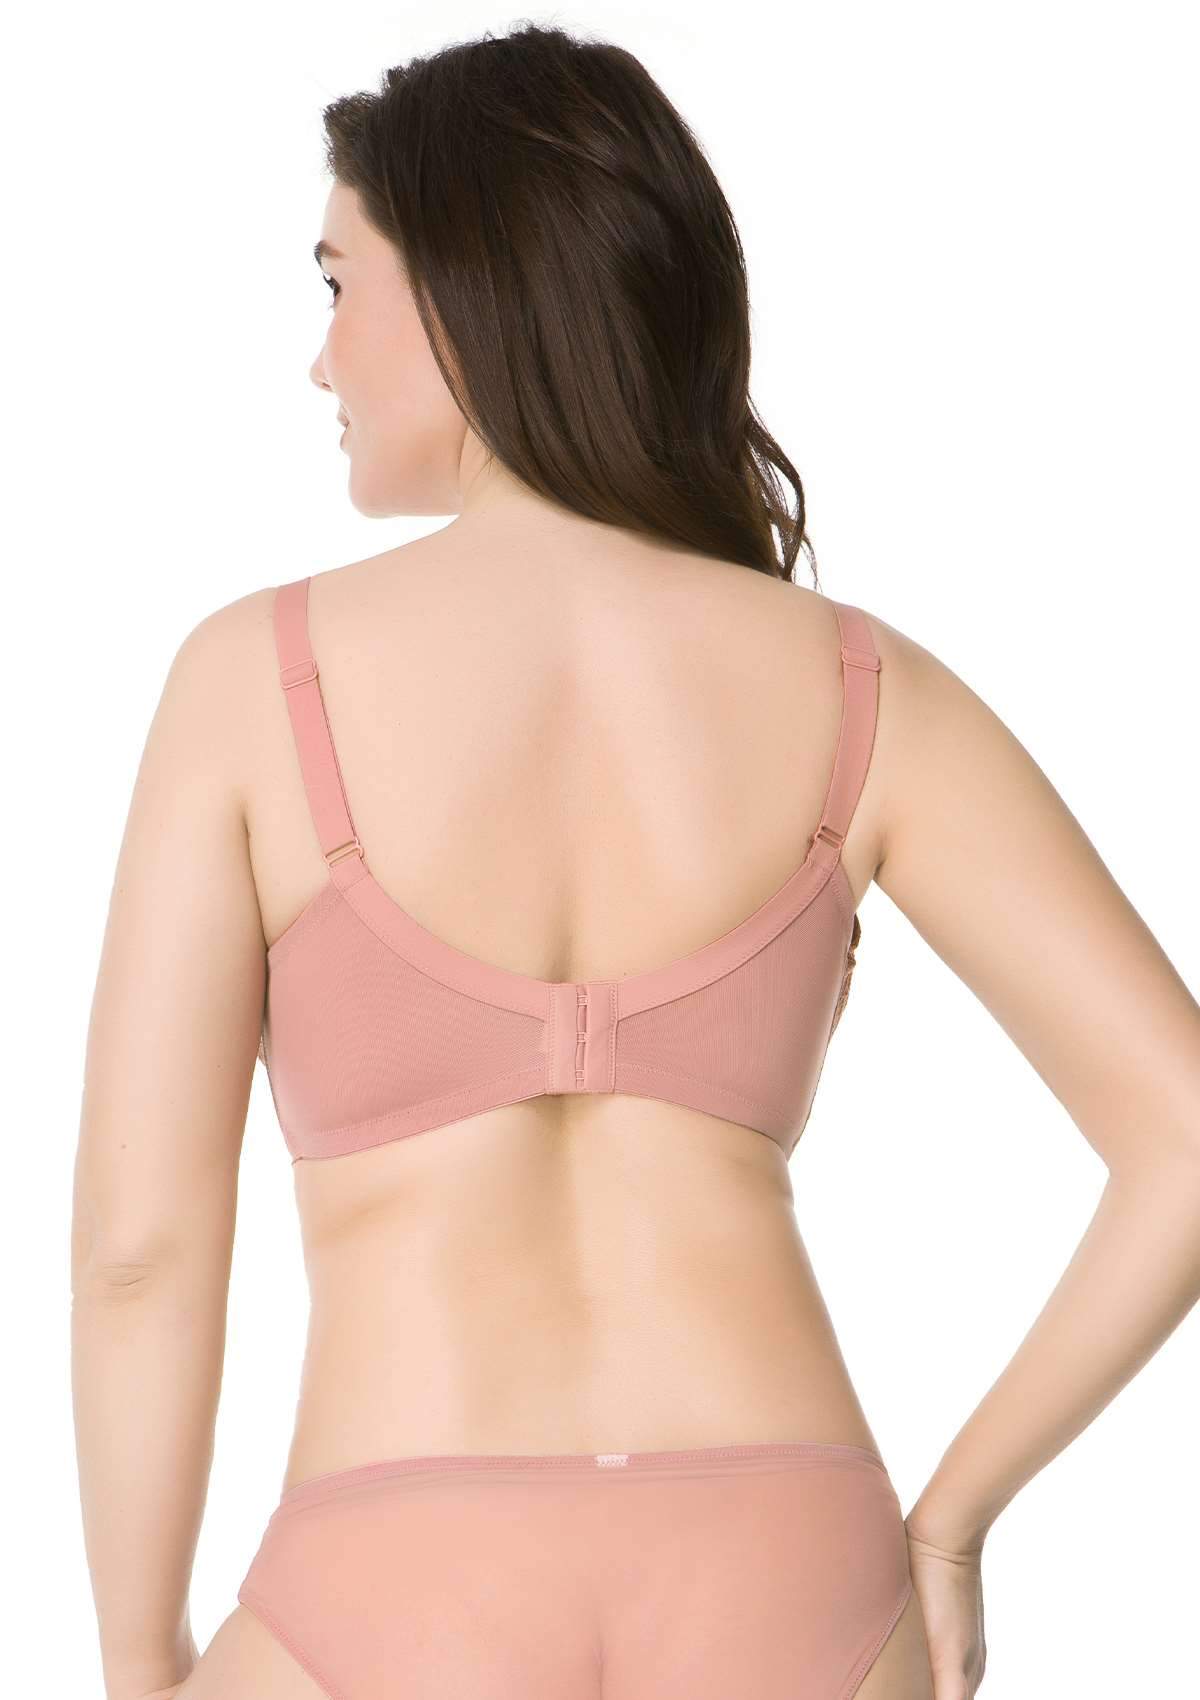 HSIA Peony Lace Unlined Supportive Underwire Bra - Light Coral / 36 / C